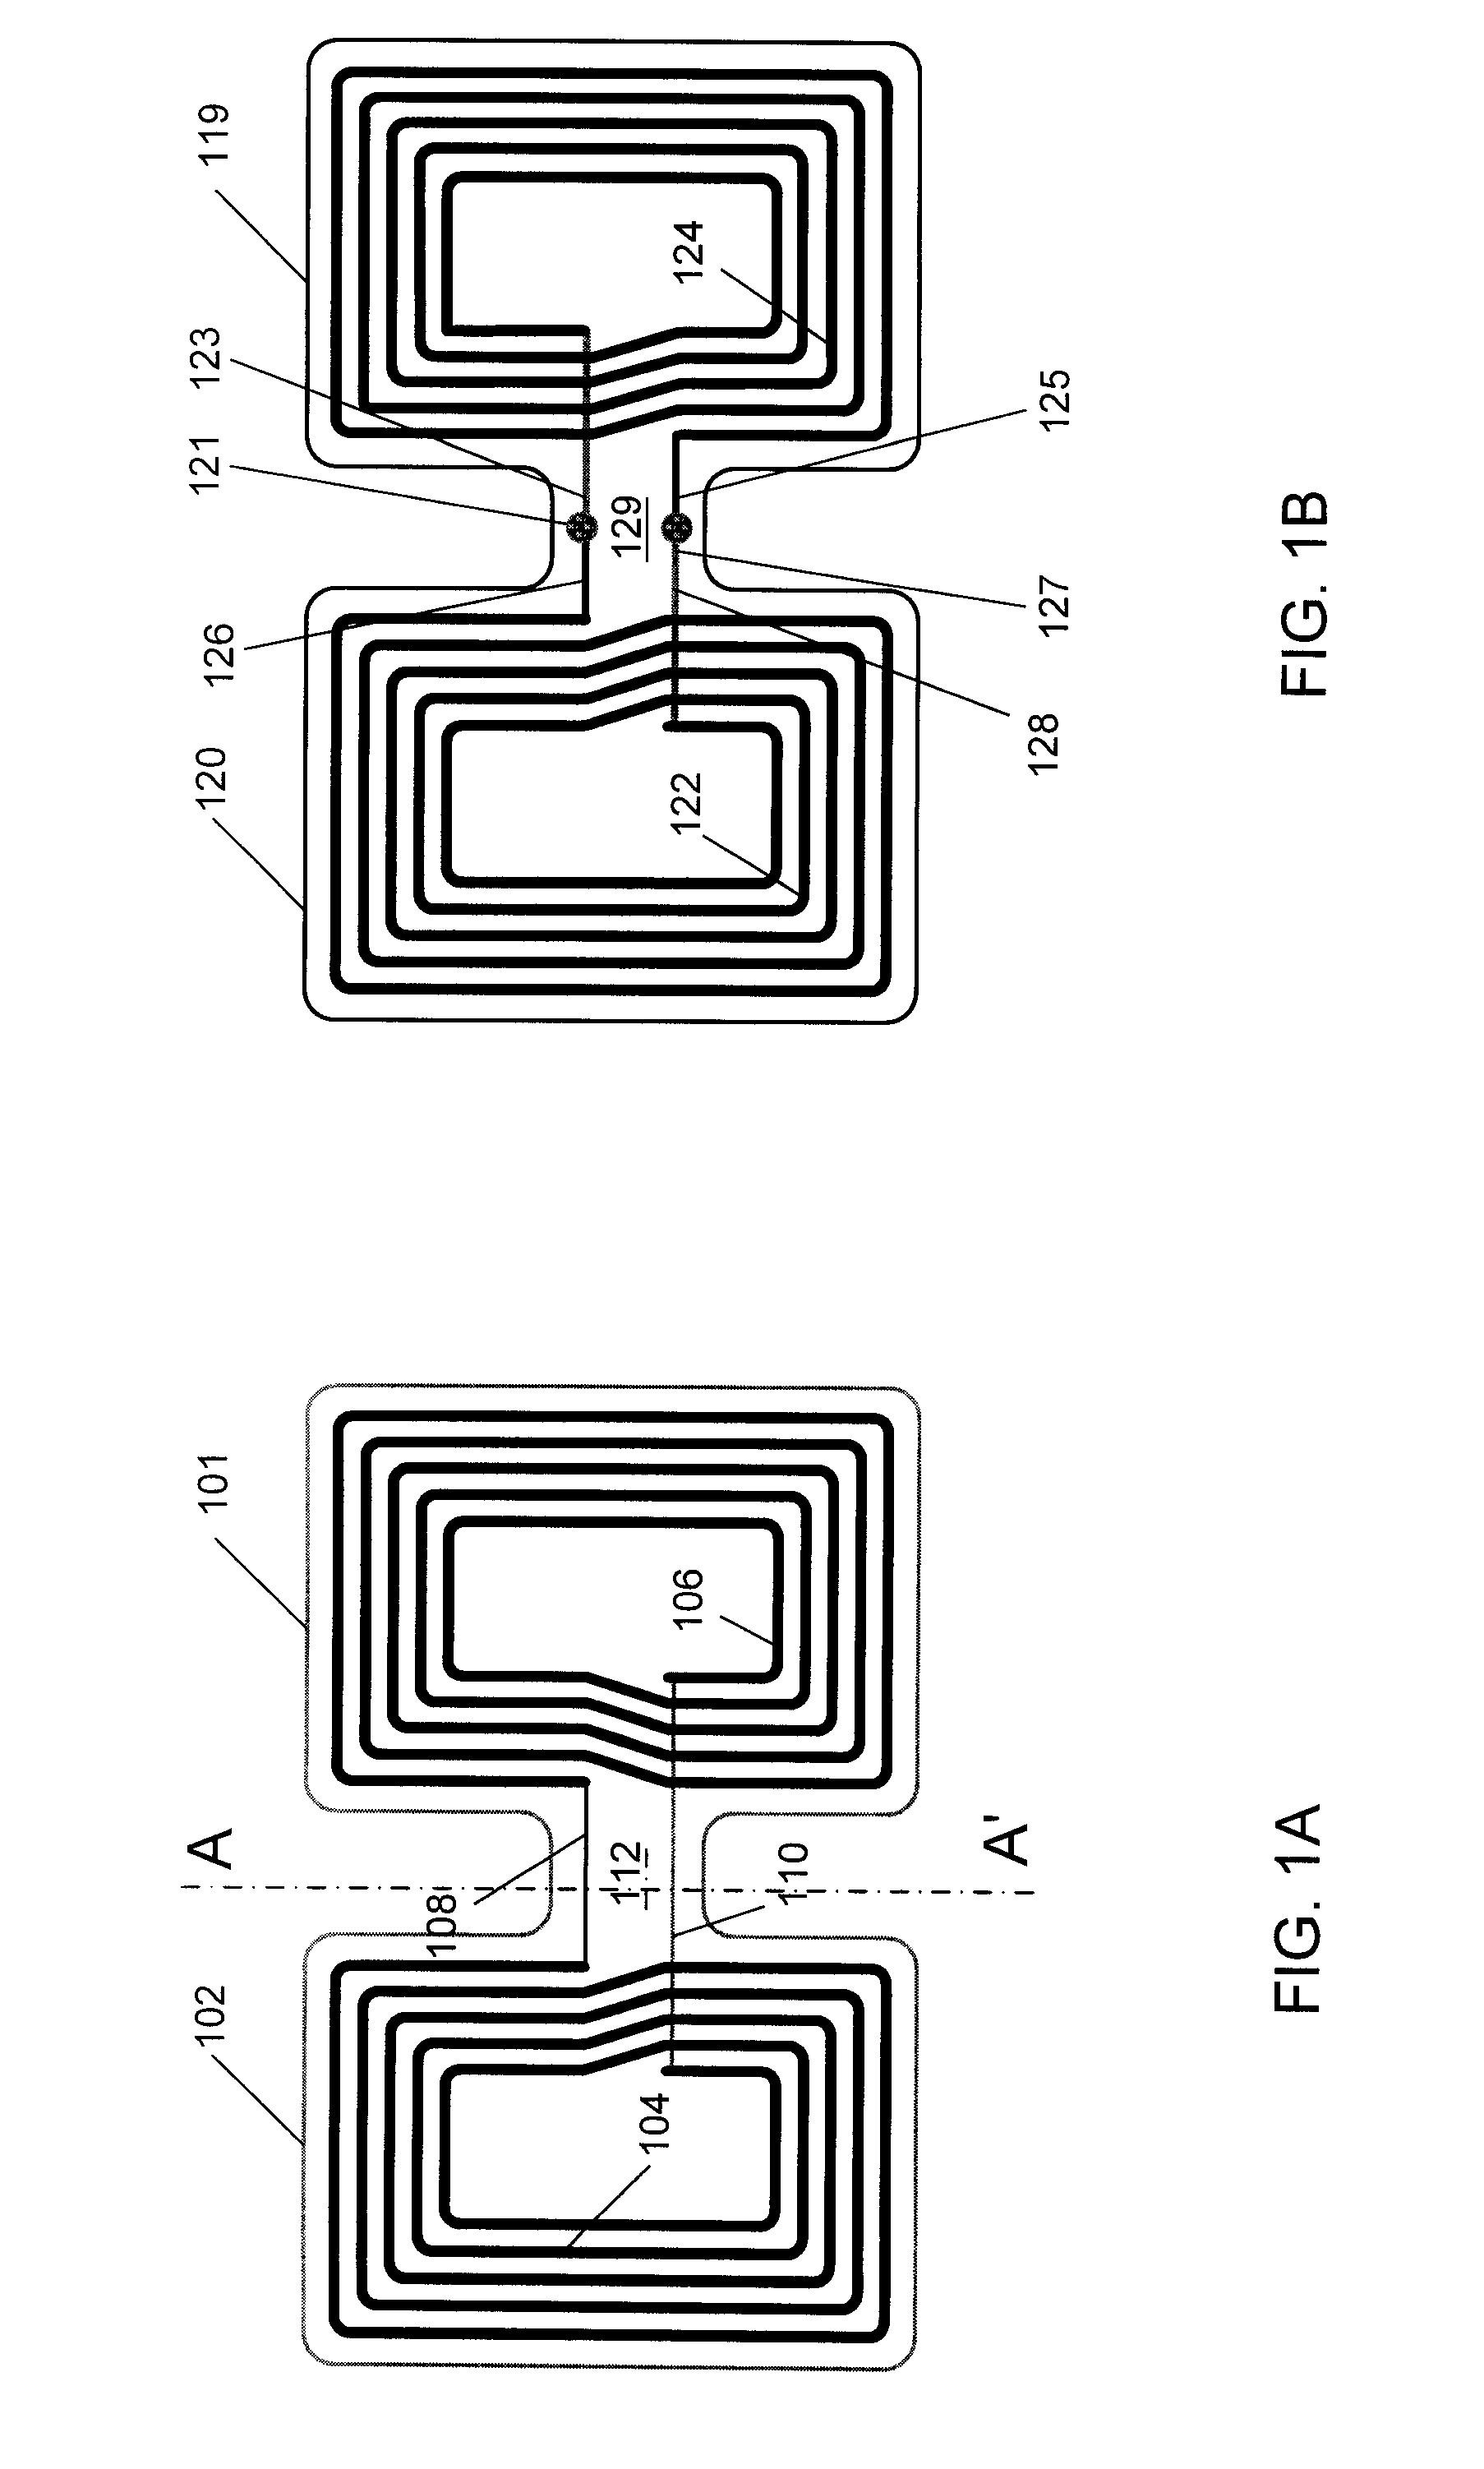 Systems and methods for enhancing the magnetic coupling in a wireless communication system